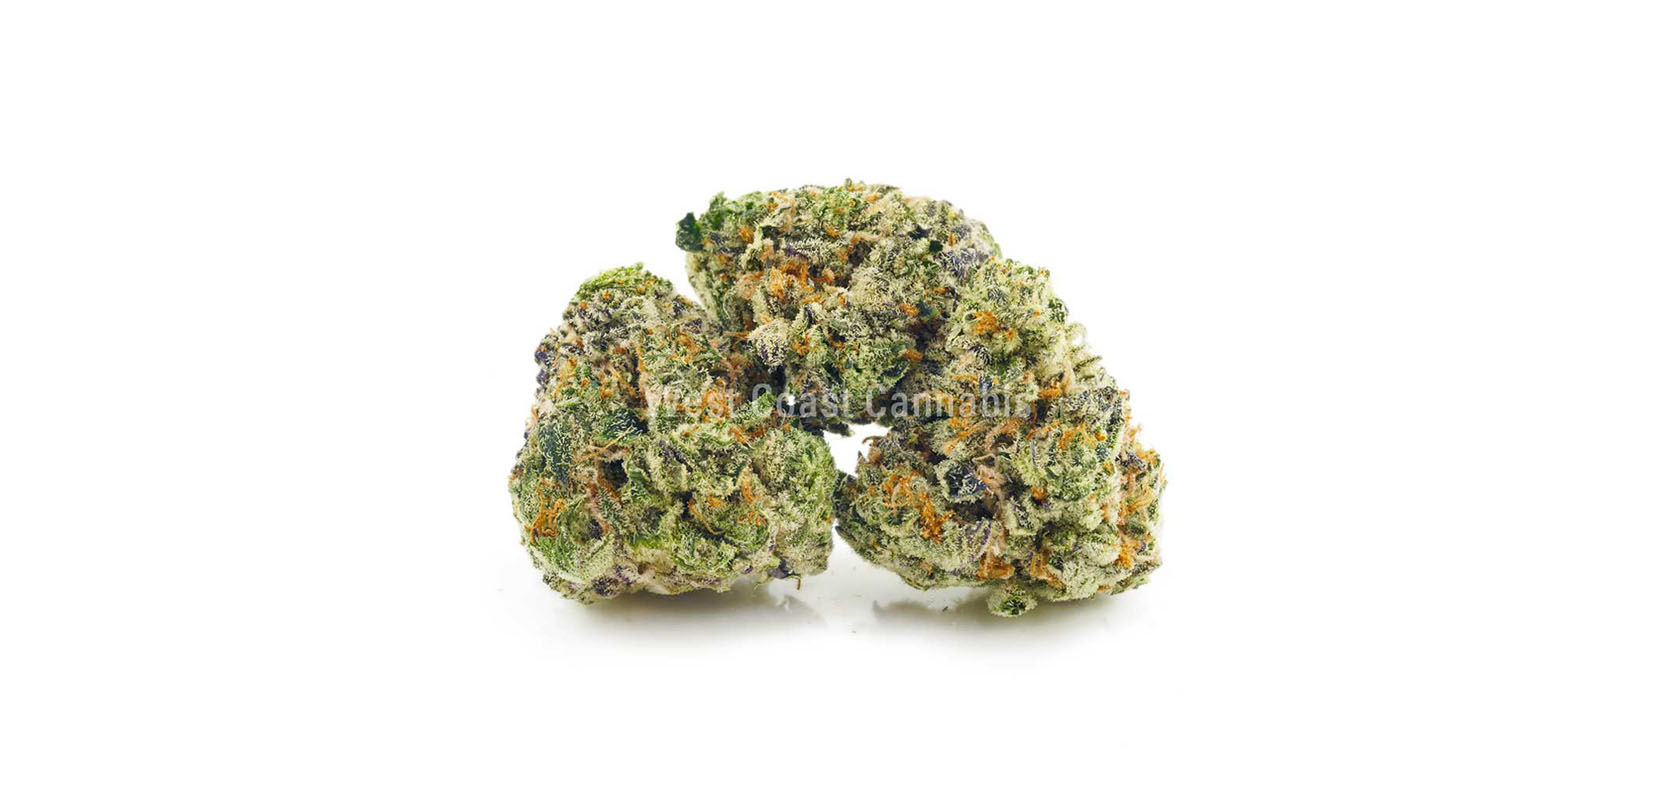 Black Tuna budget buds for sale online from cheapweed dispensary West Coast Cannabis. ganjaexpress. moon rock weed. cannabis dispensary. weed stores. buy weed online Canada.